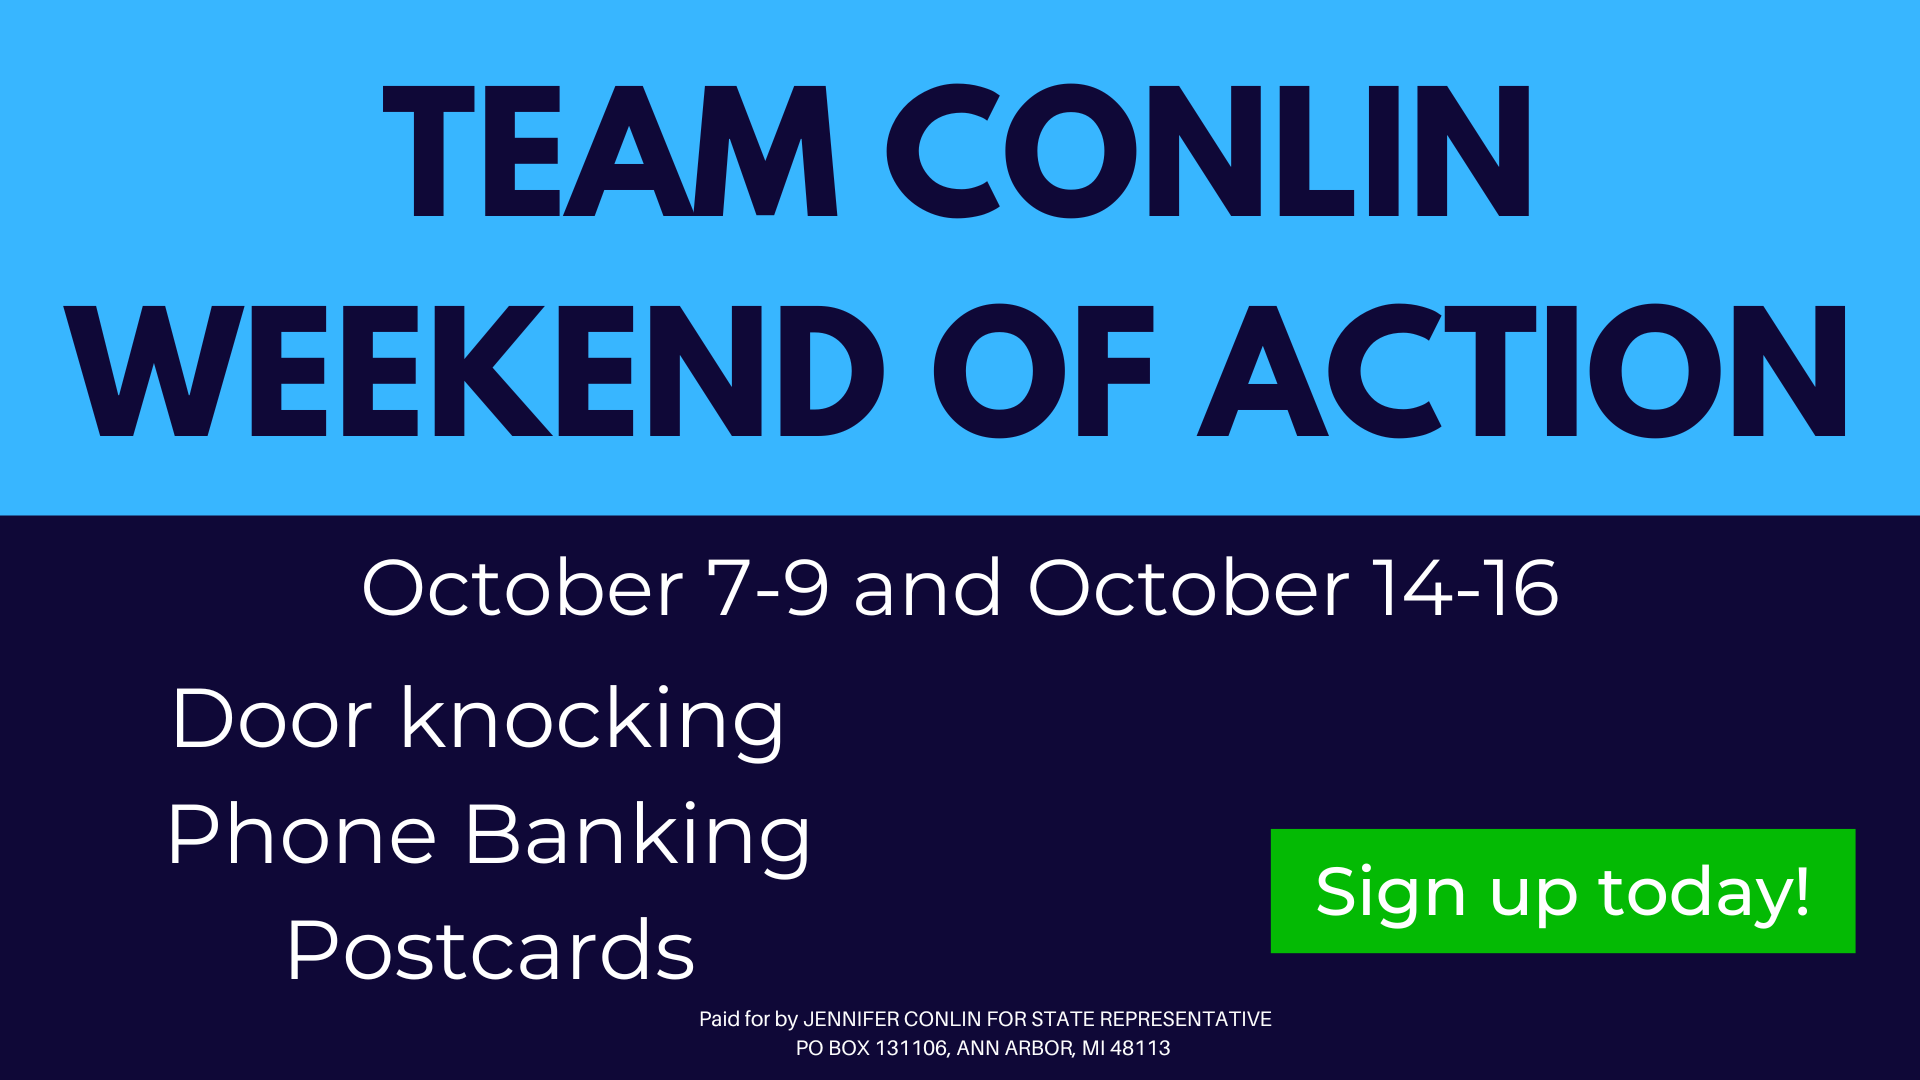 et details and sign up for "Weekends of Action for Conlin" hosted by Jennifer Conlin for State Rep